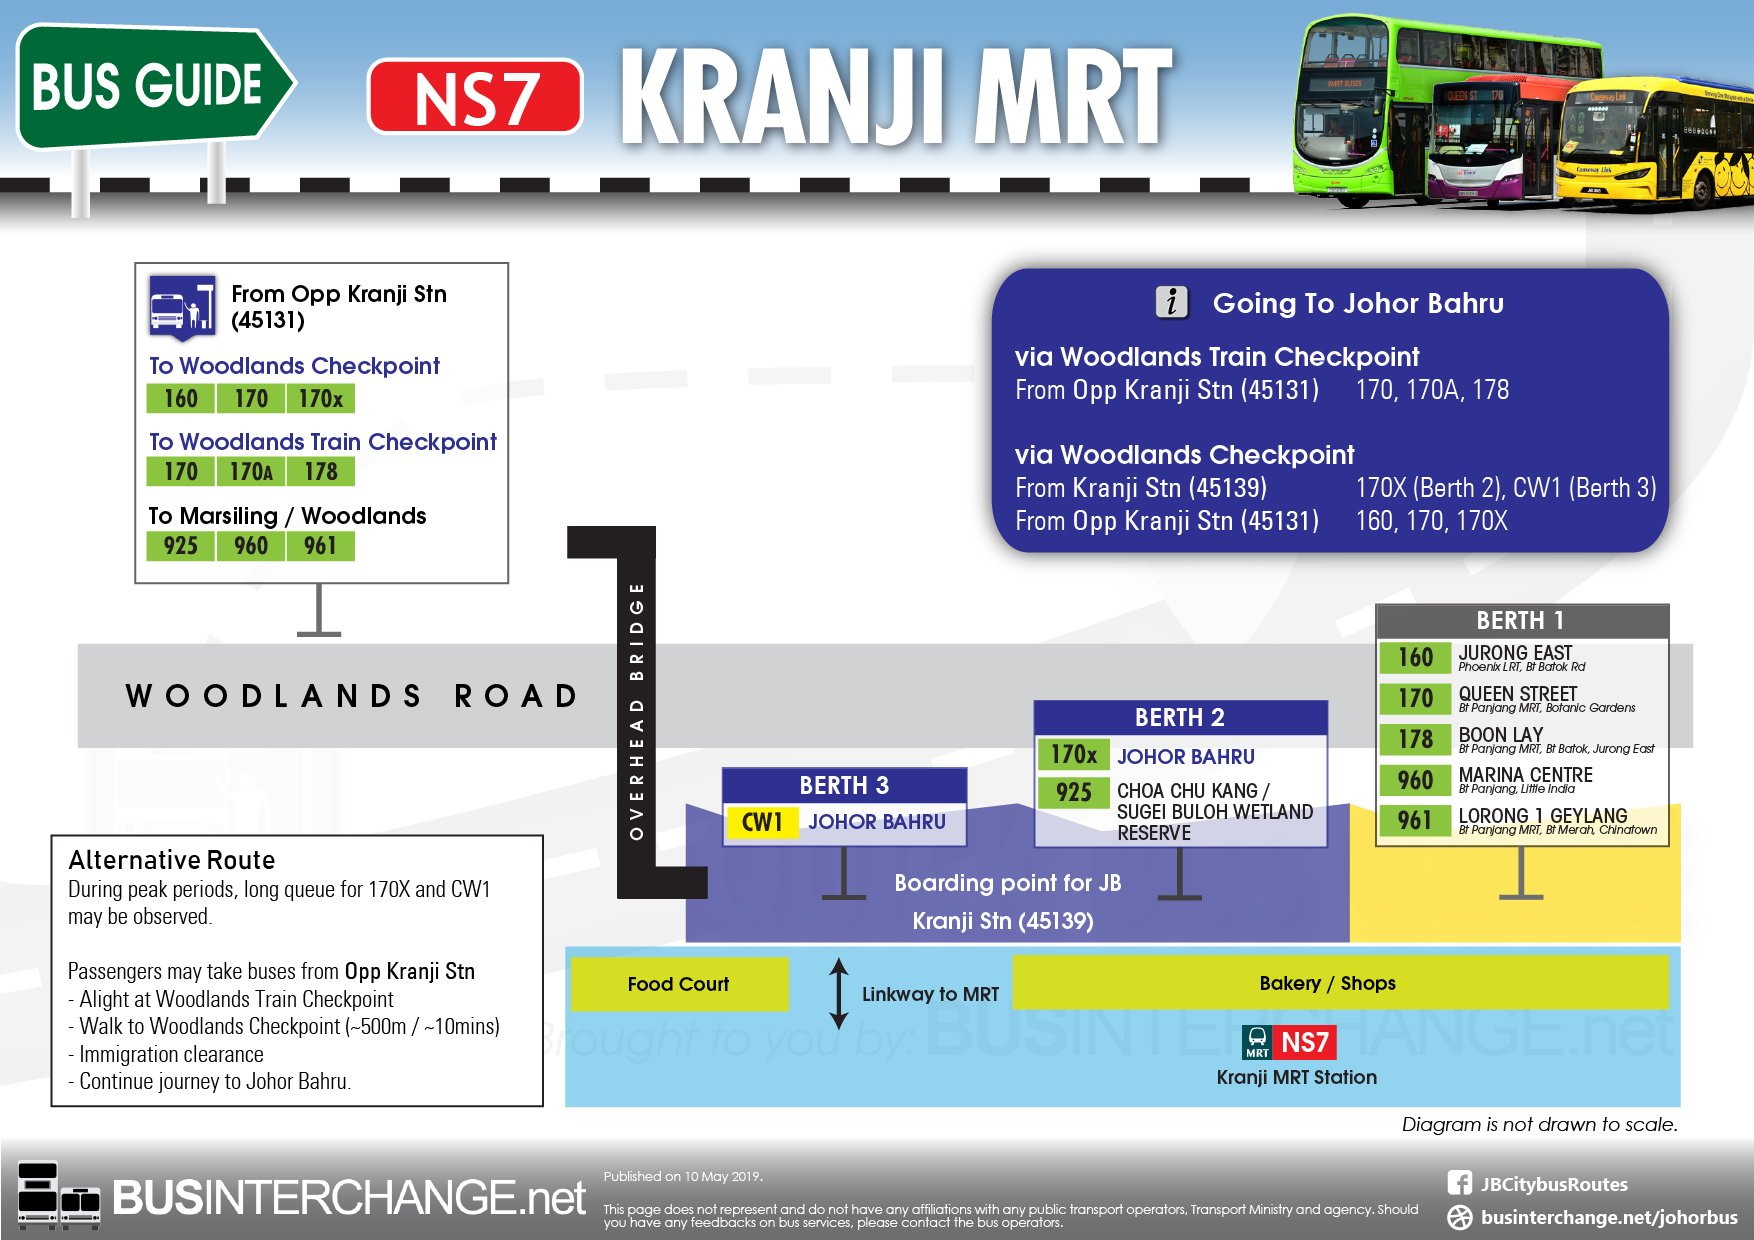 Bus guide from Kranji MRT and new berth allocation at Kranji MRT from 5 May 2019.